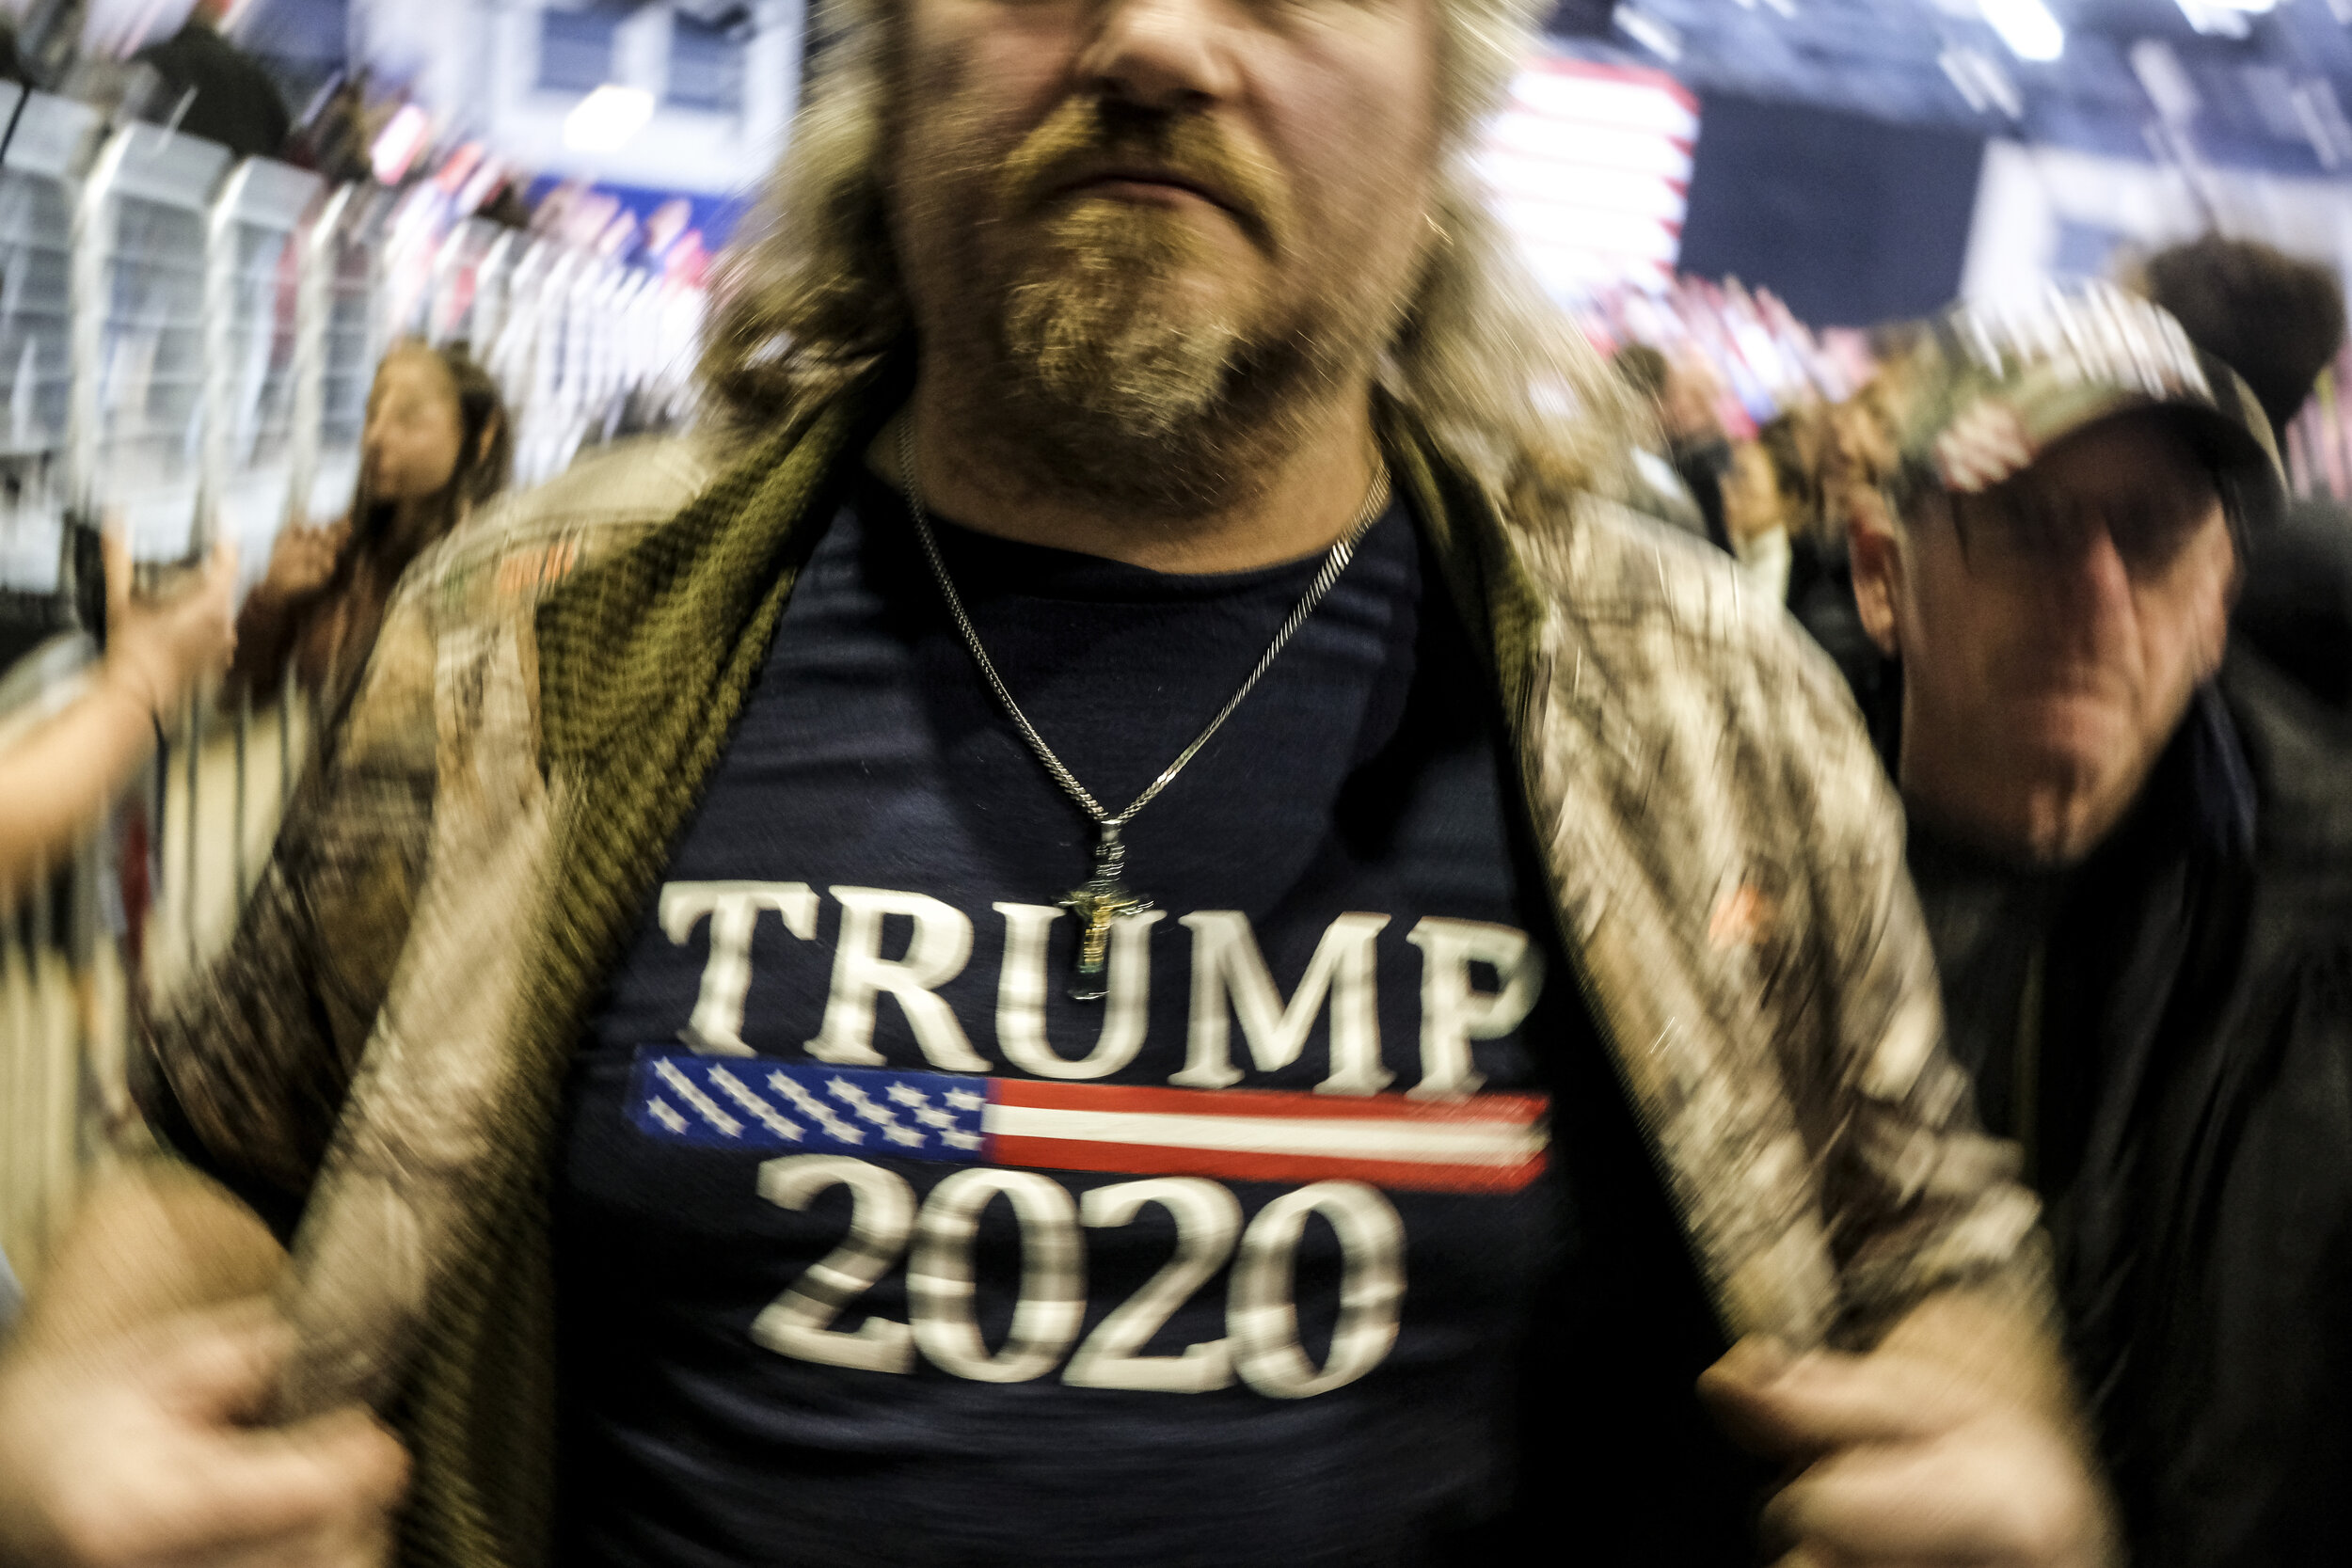  A supporter of President Donald Trump shows off his shirt during a Donald Trump rally in Battle Creek, Michigan on December 8, 2019. 